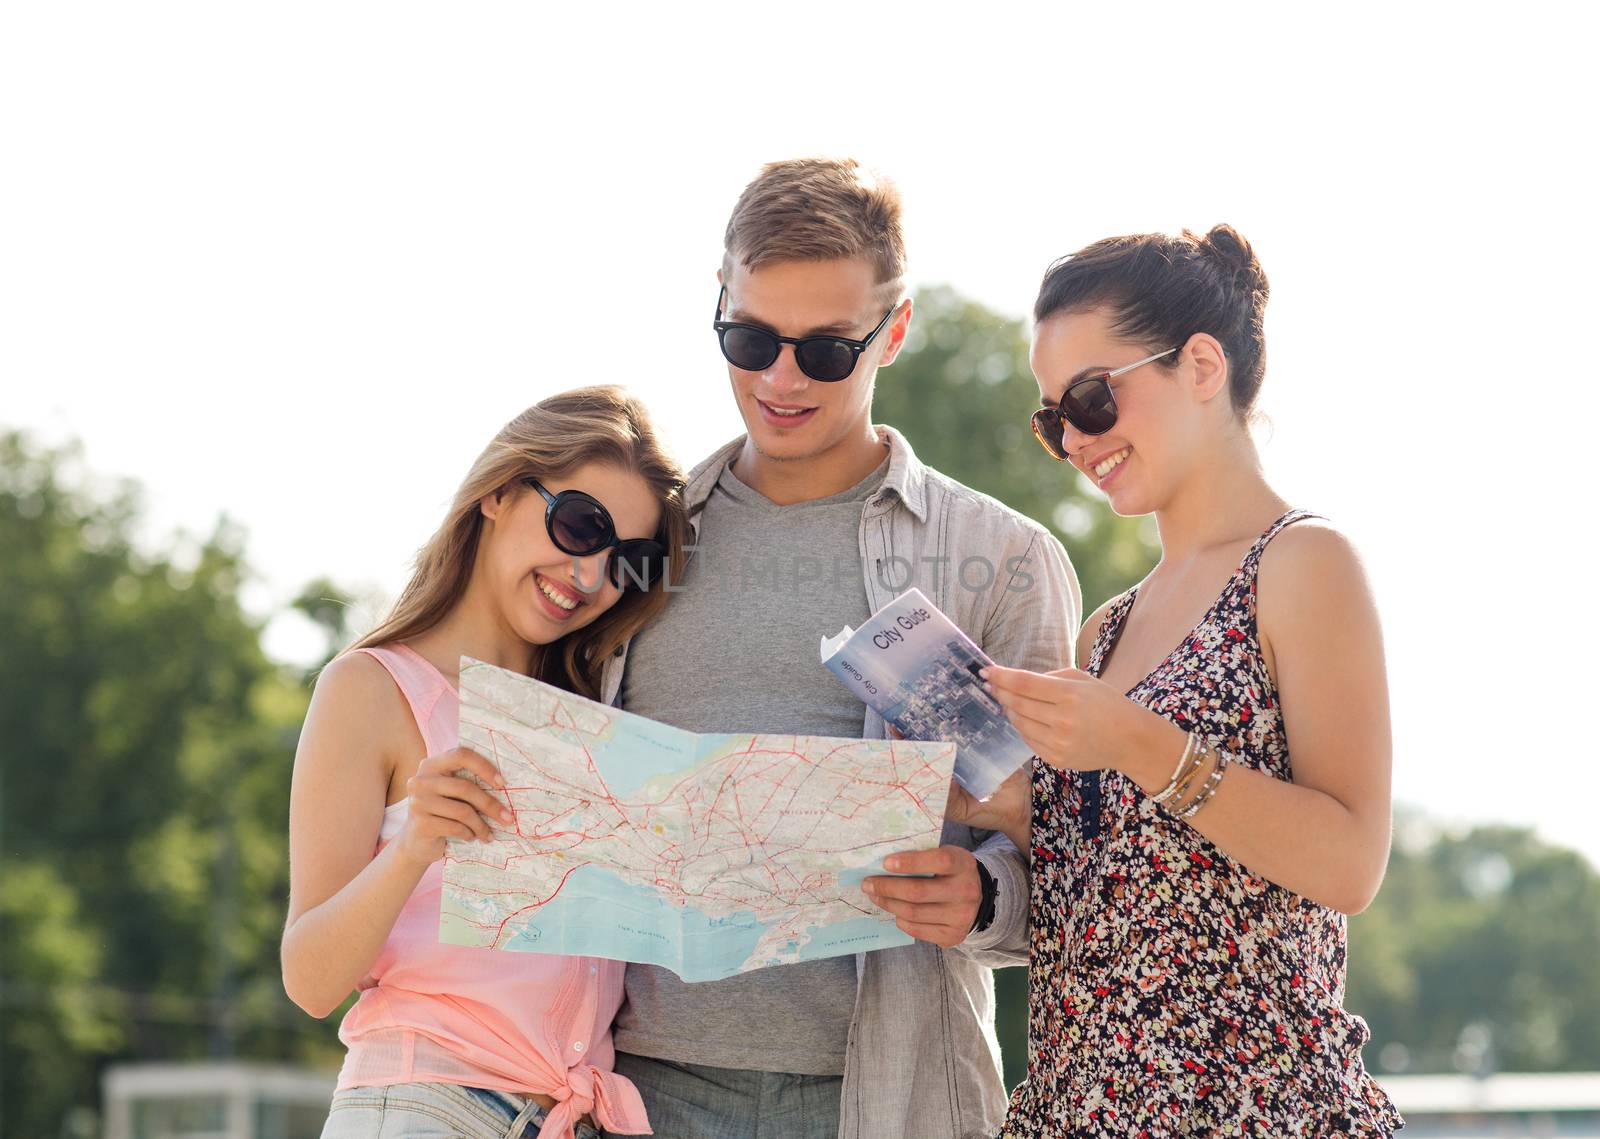 friendship, travel, tourism, vacation and people concept - smiling friends with map and city guide outdoors